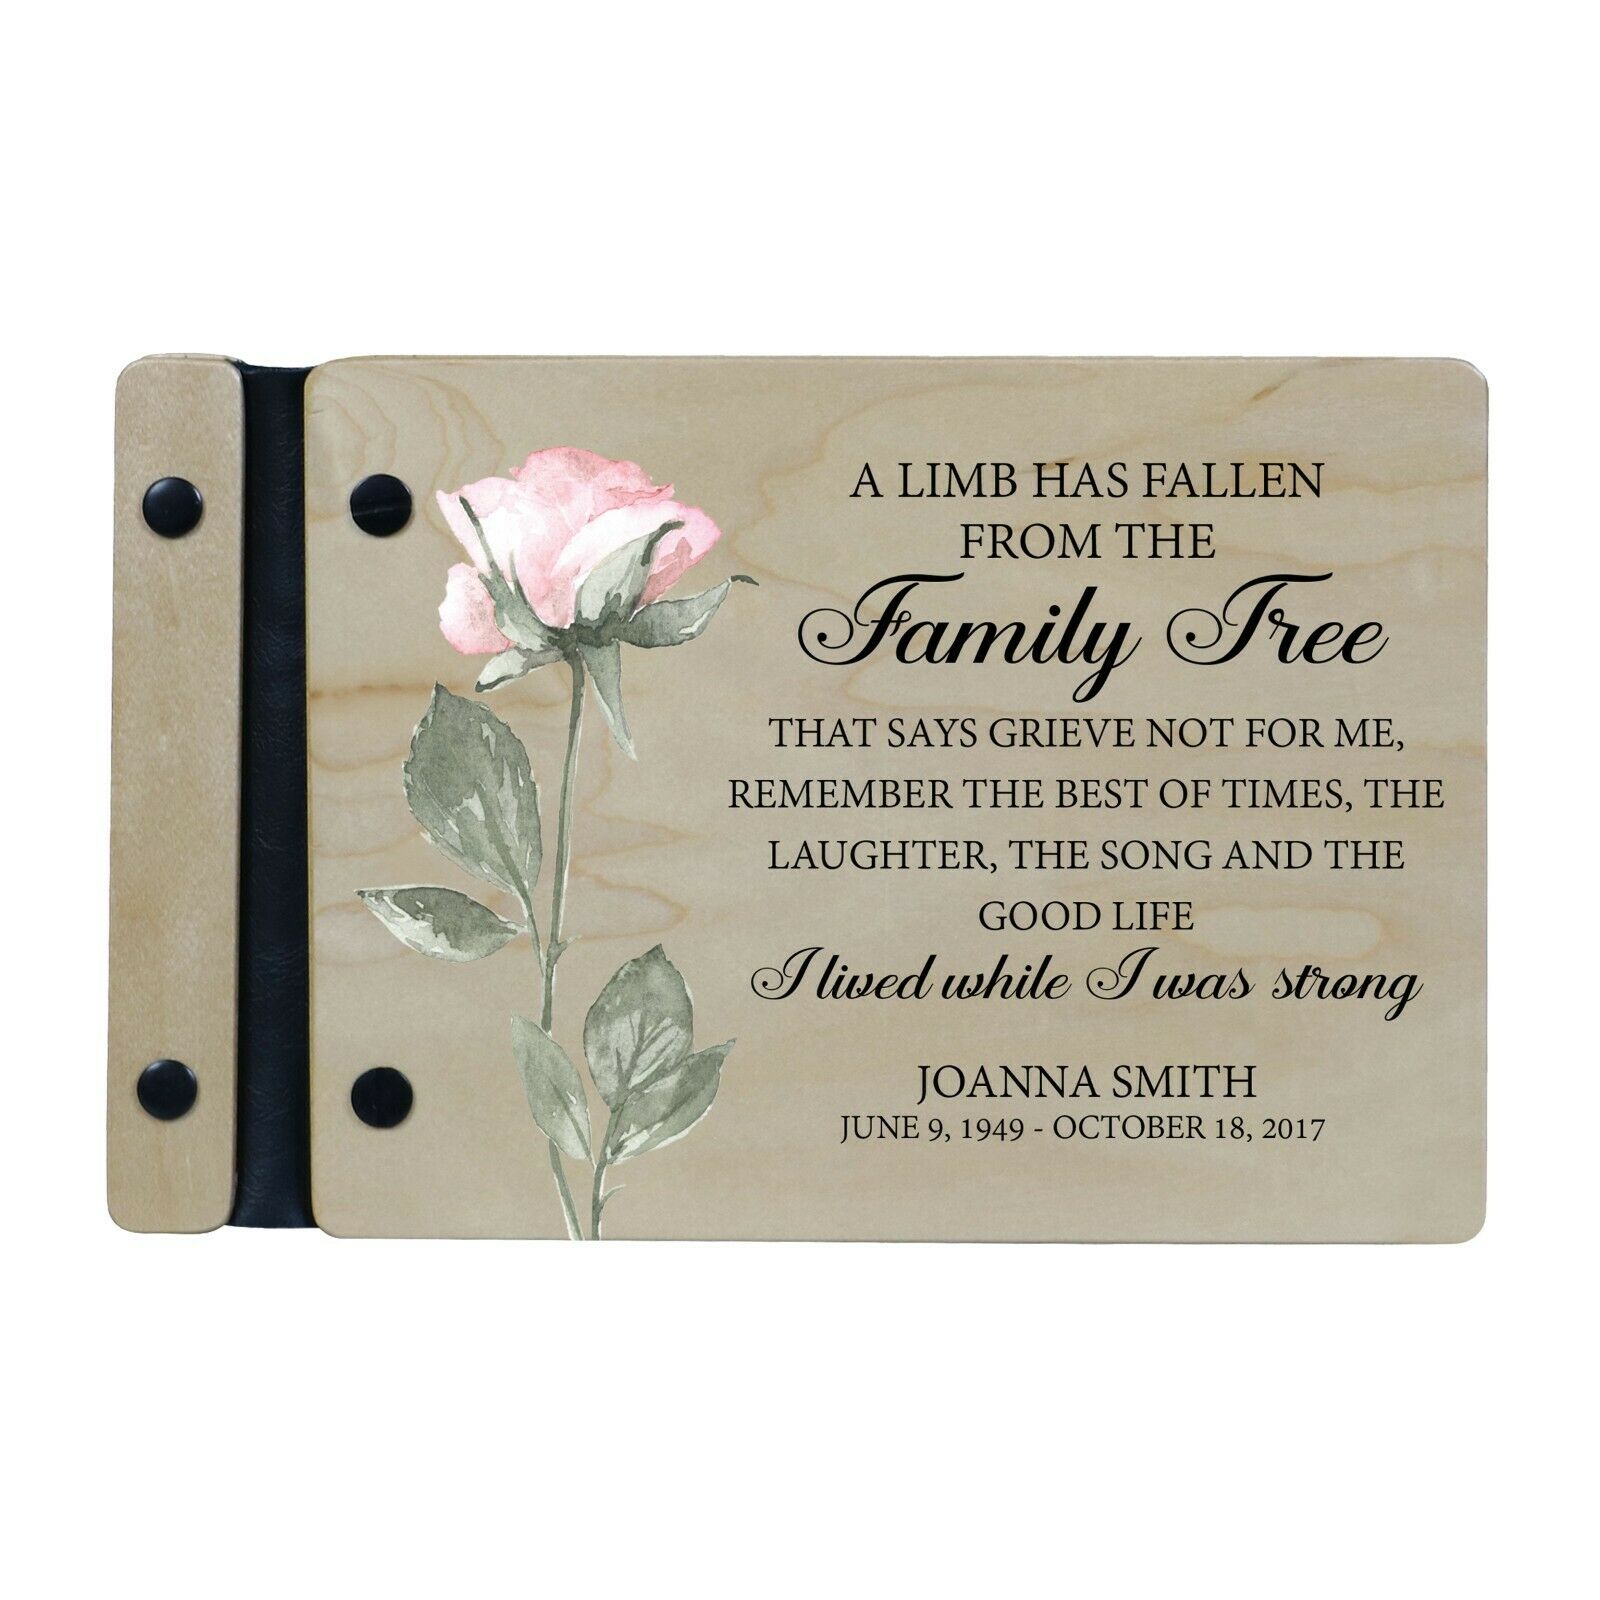 Custom Memorial Funeral Guest Book For Loss Of Loved One 9x6 - A Limb Has Fallen